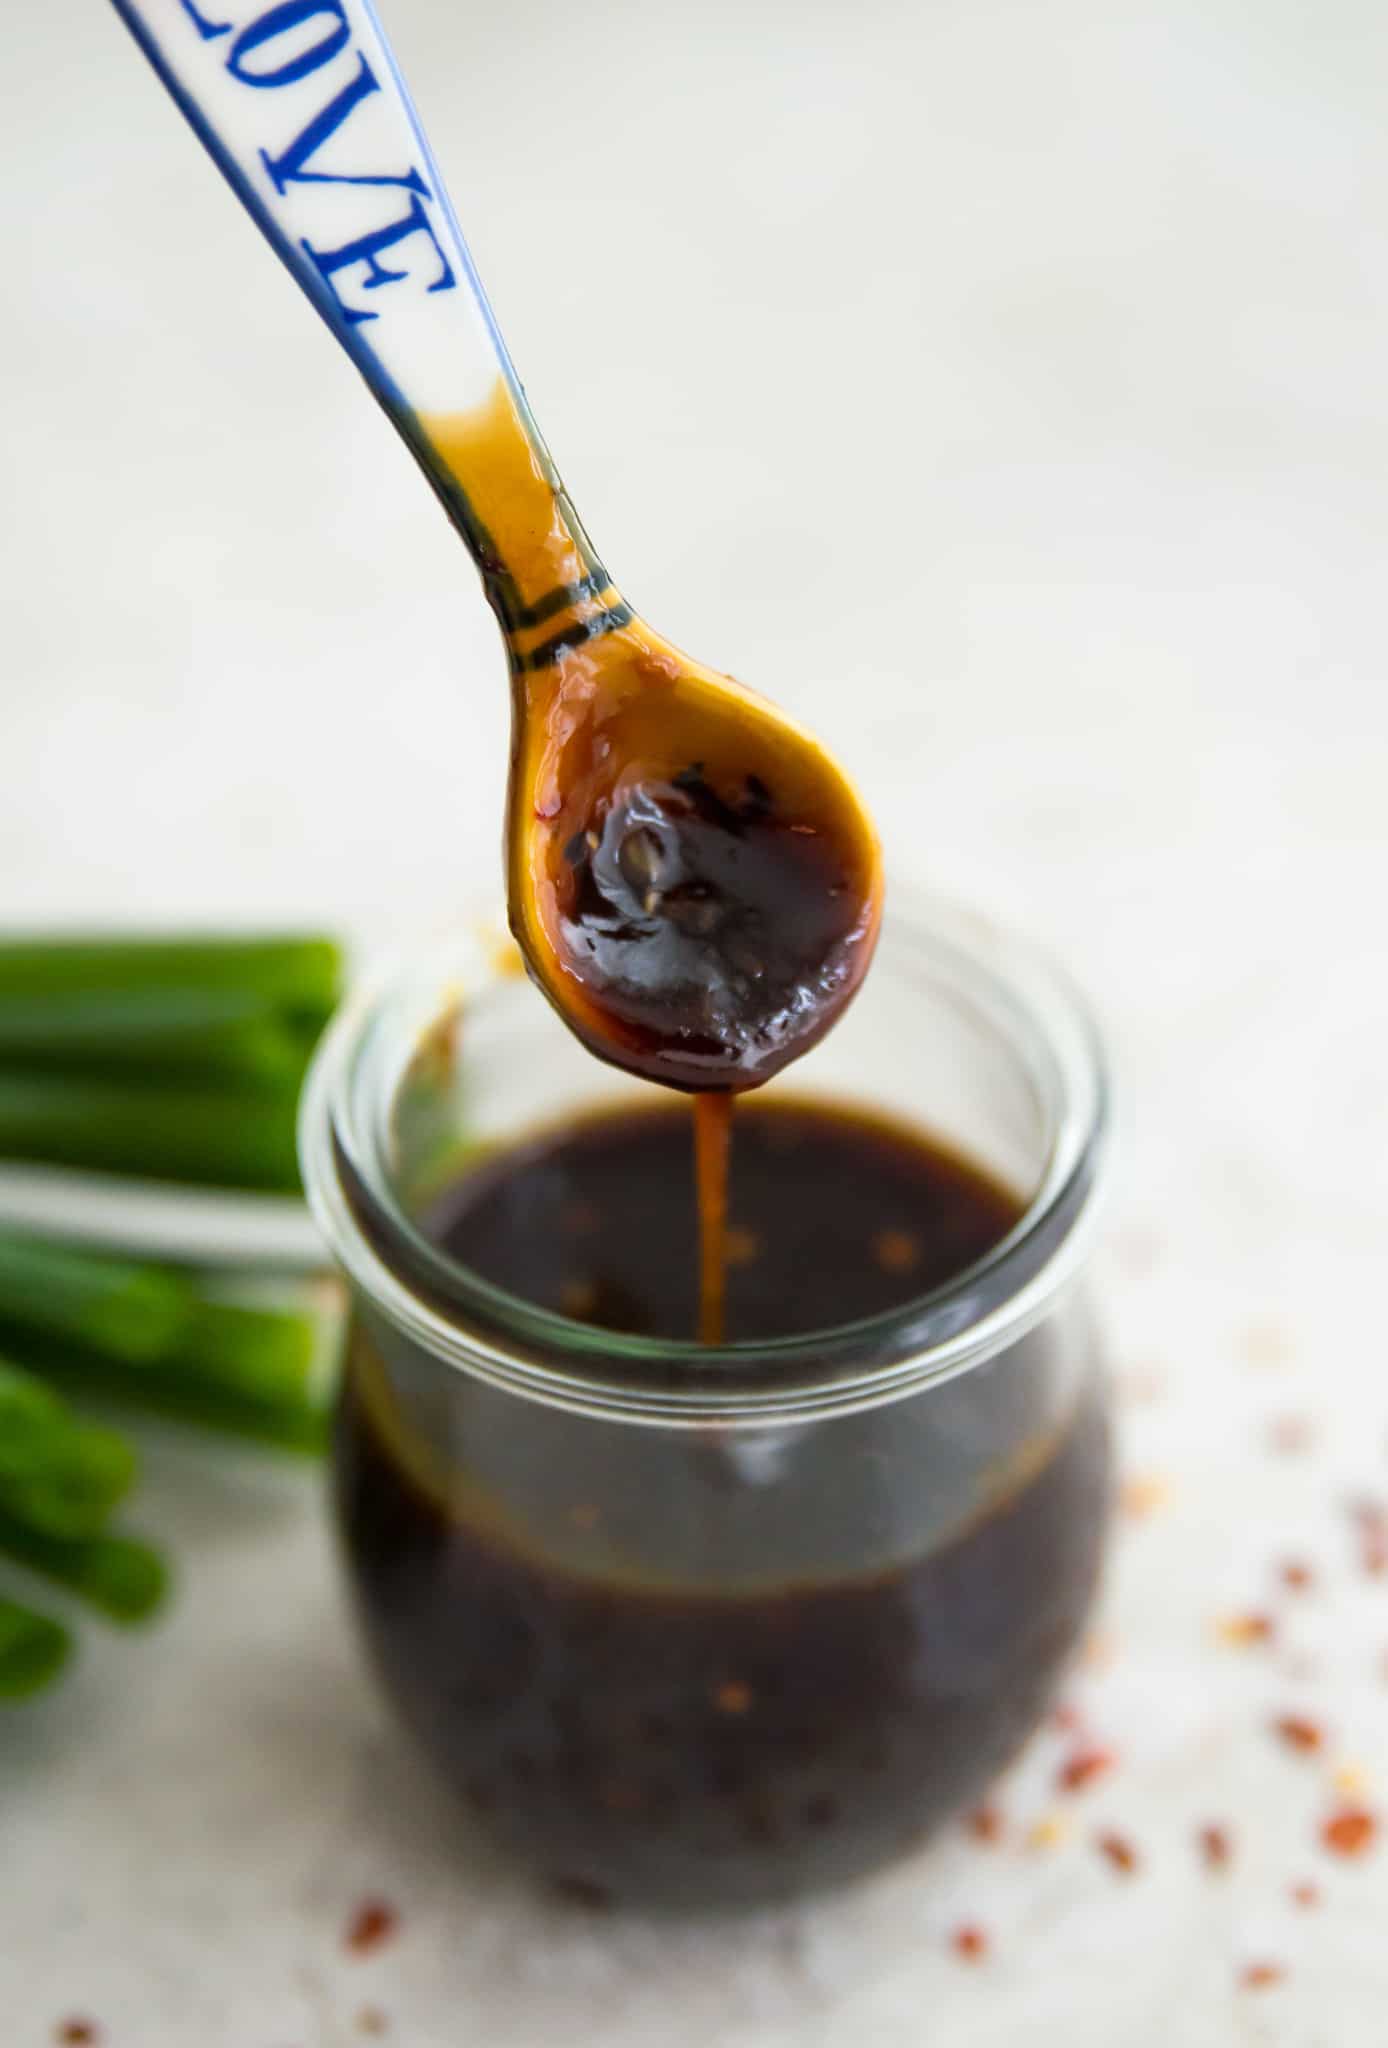 A spoon being dipped into a jar of teriyaki sauce. 